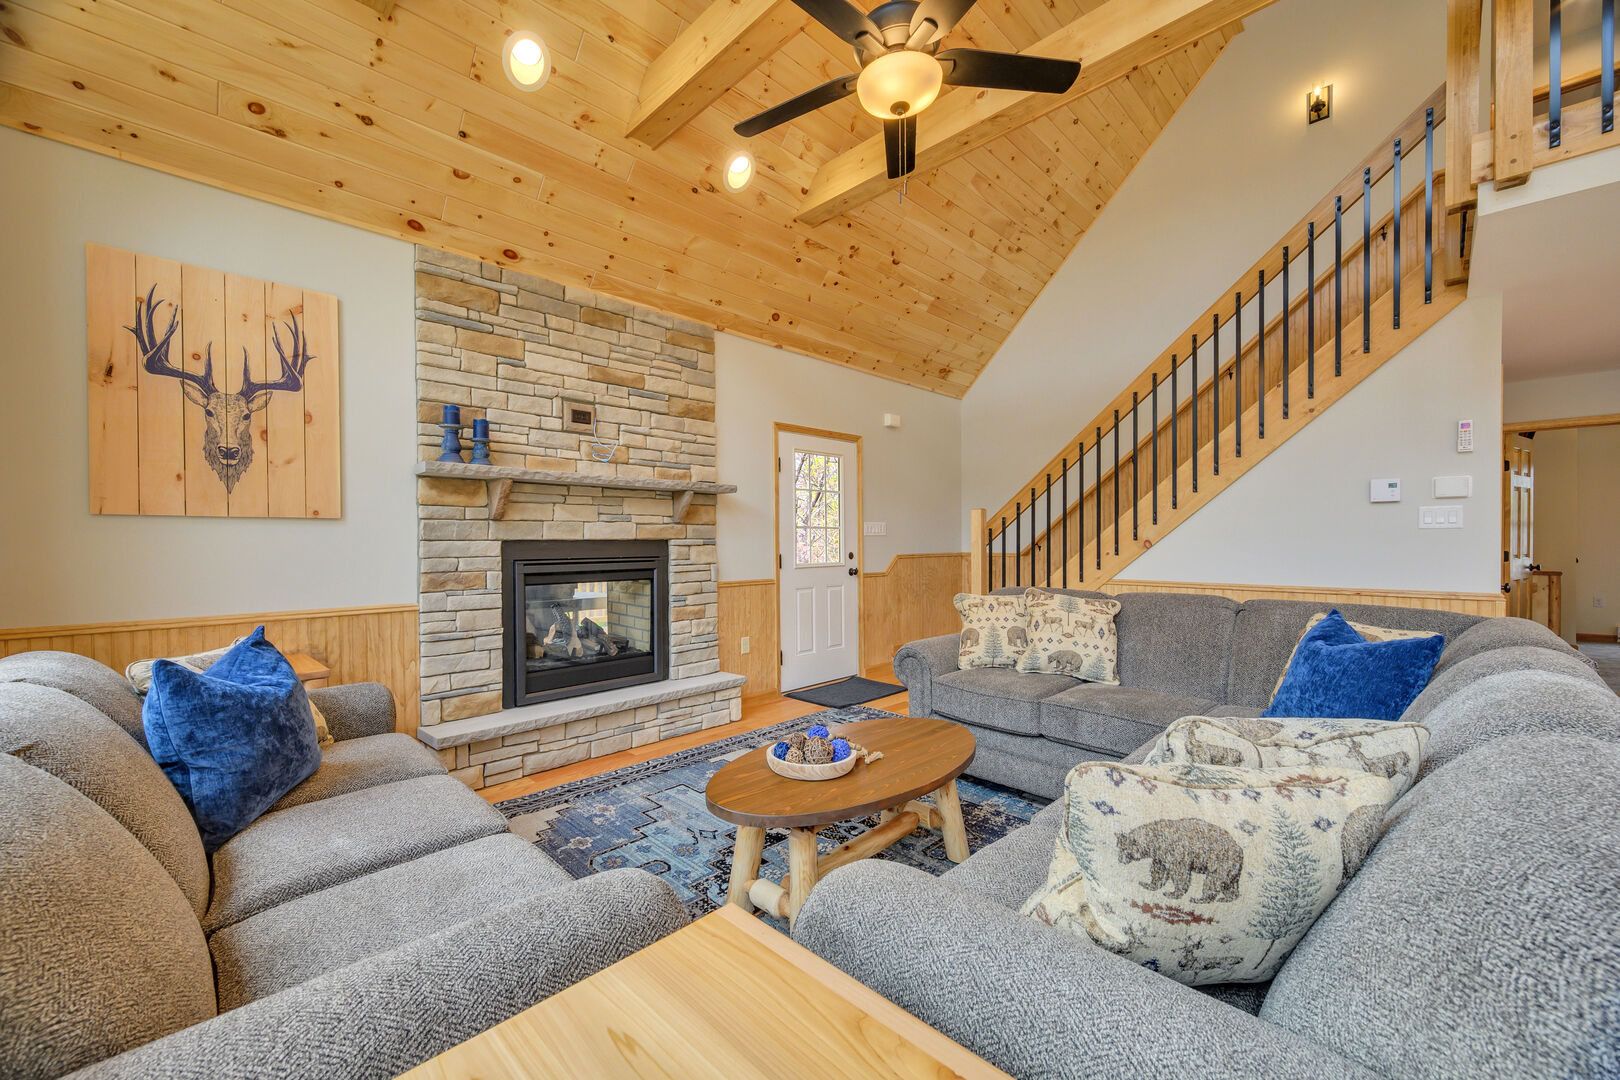 Family Time together in the 2nd Floor Great Room with Indoor/Outdoor Fireplace.